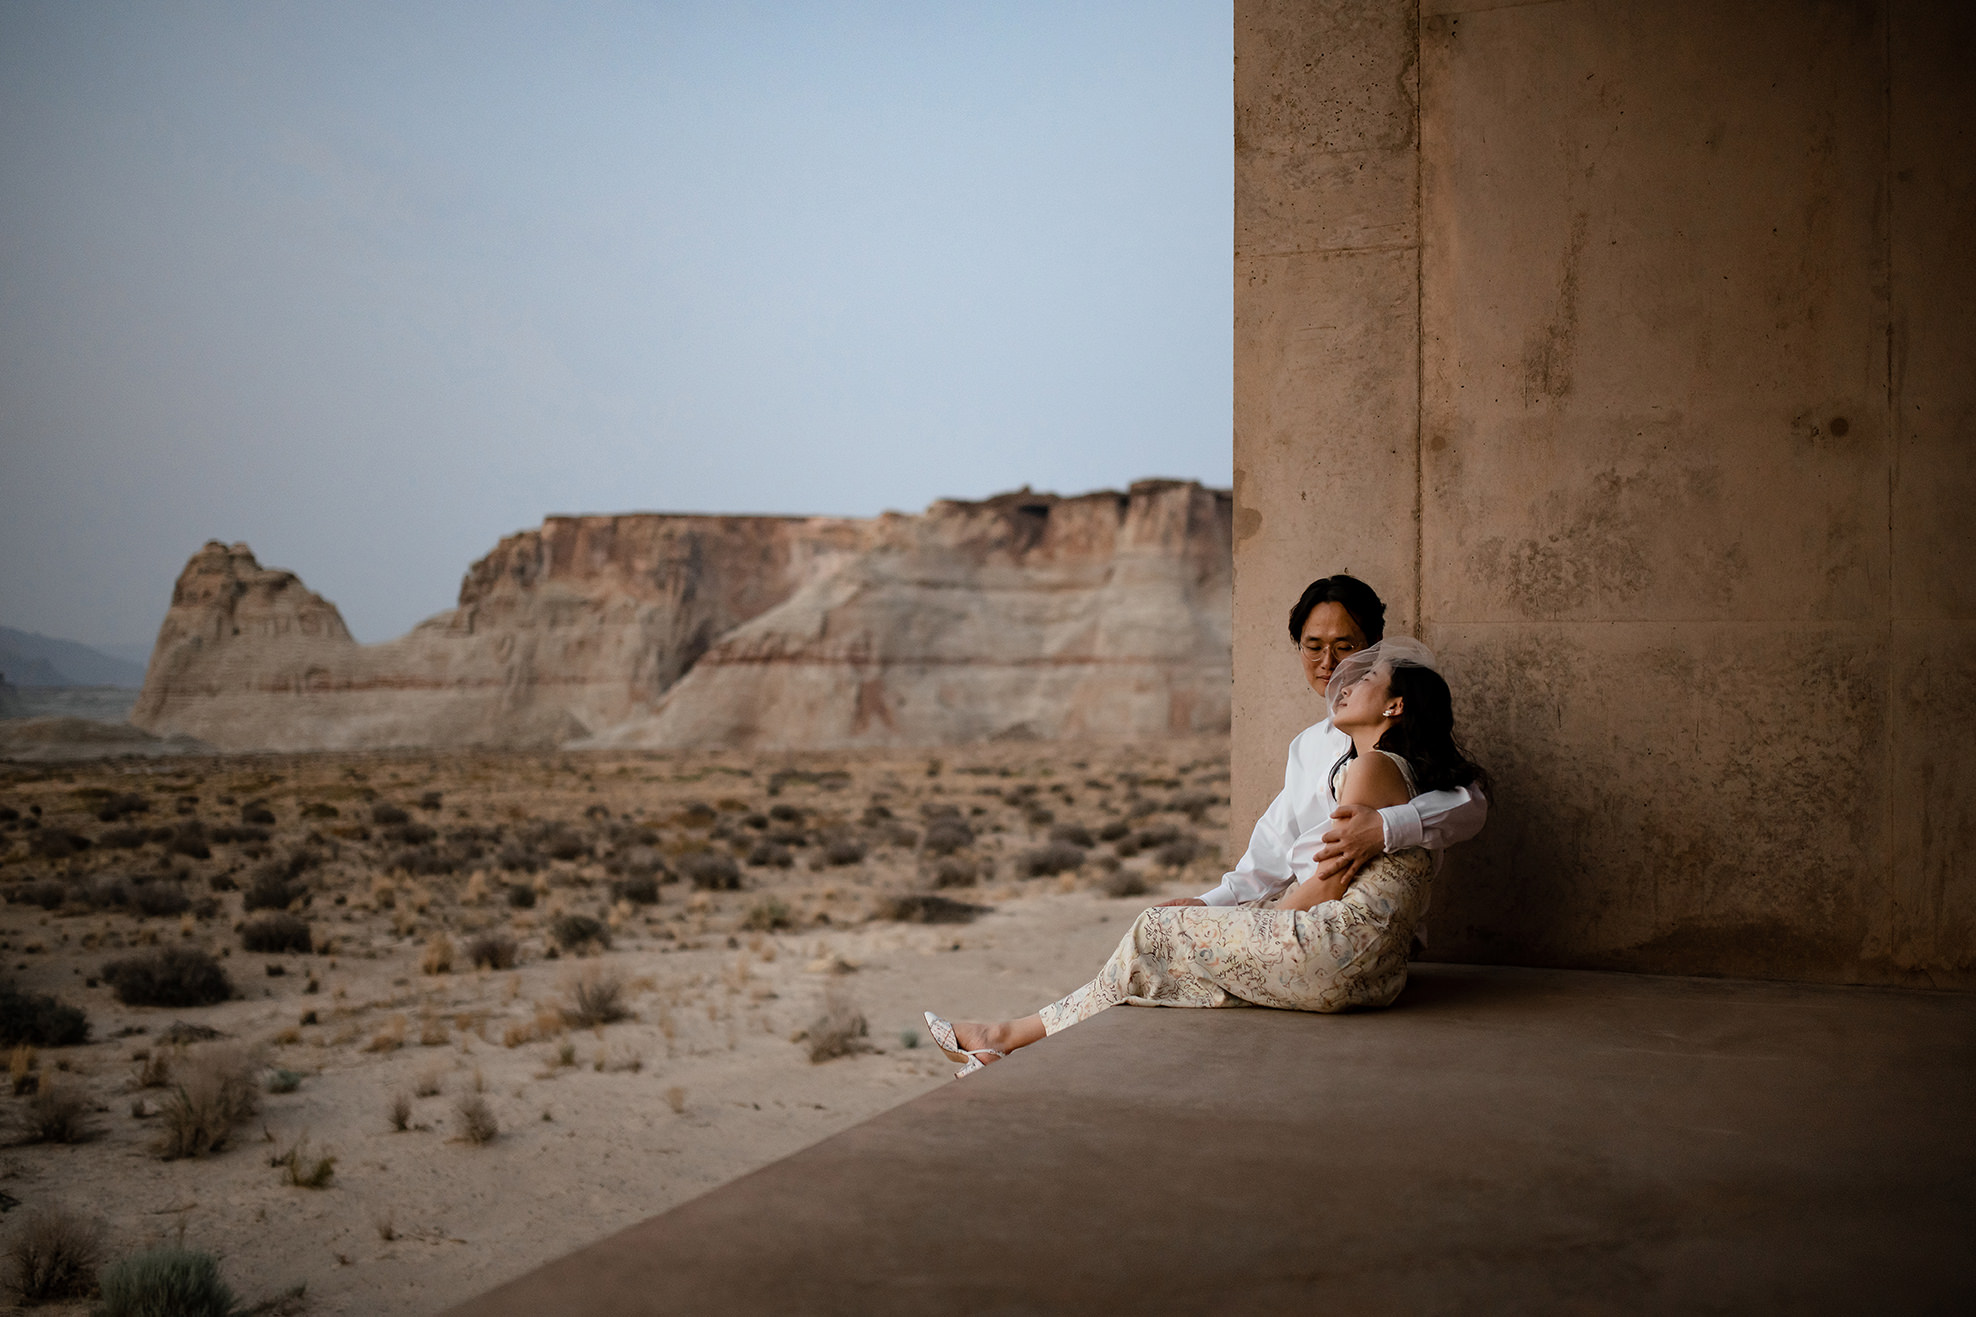 Husband holds his wife around the shoulder while they sit on a concrete structure in the dessert.